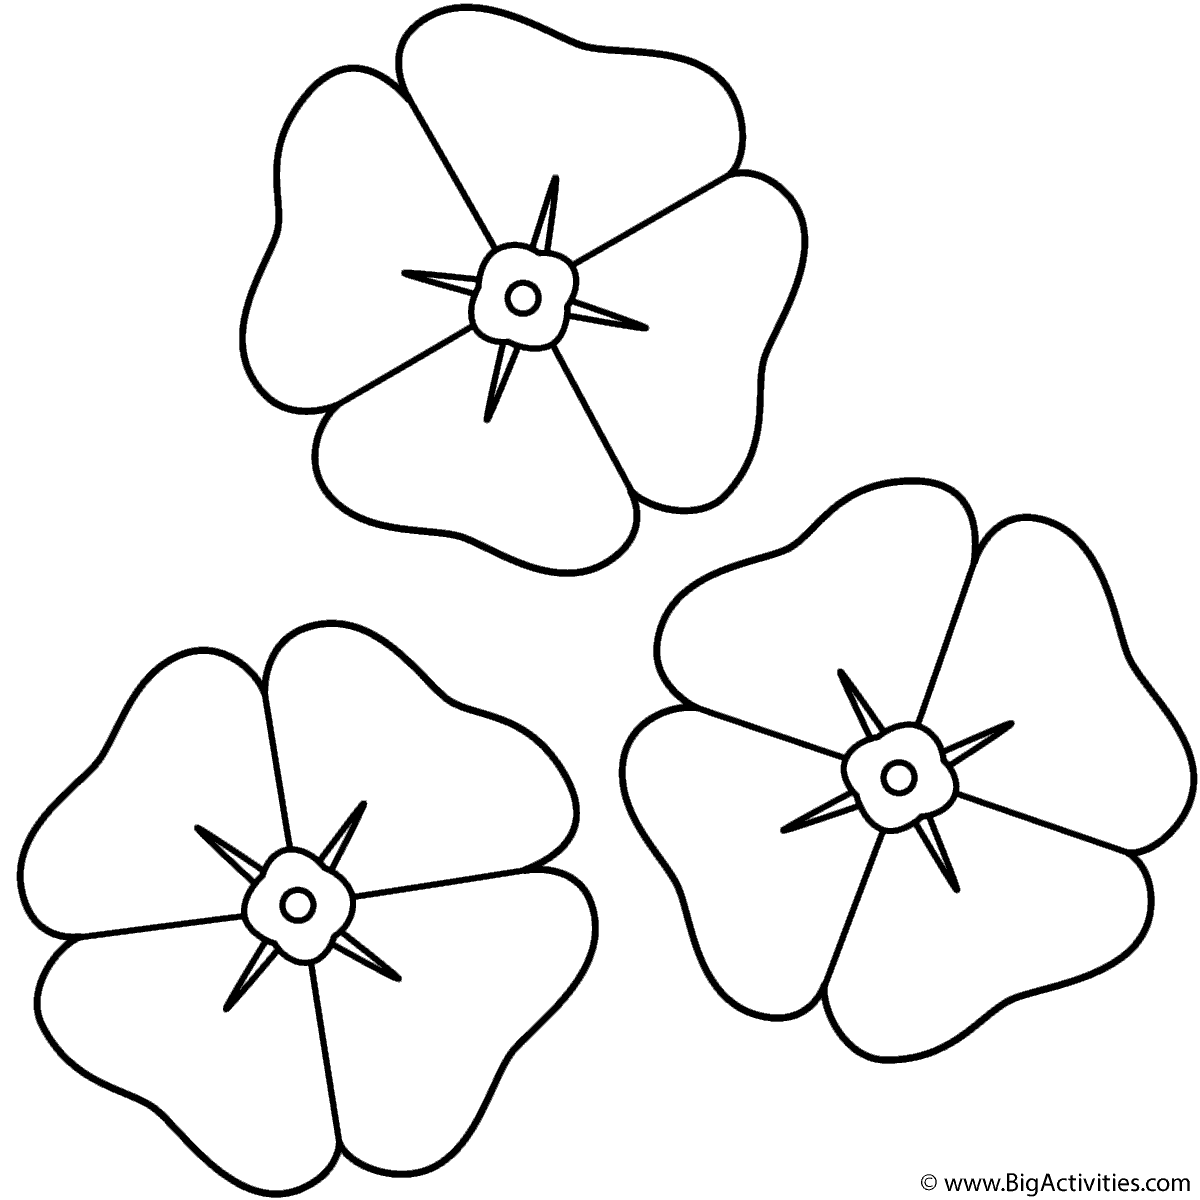 Poppies Coloring Page (Remembrance Day)